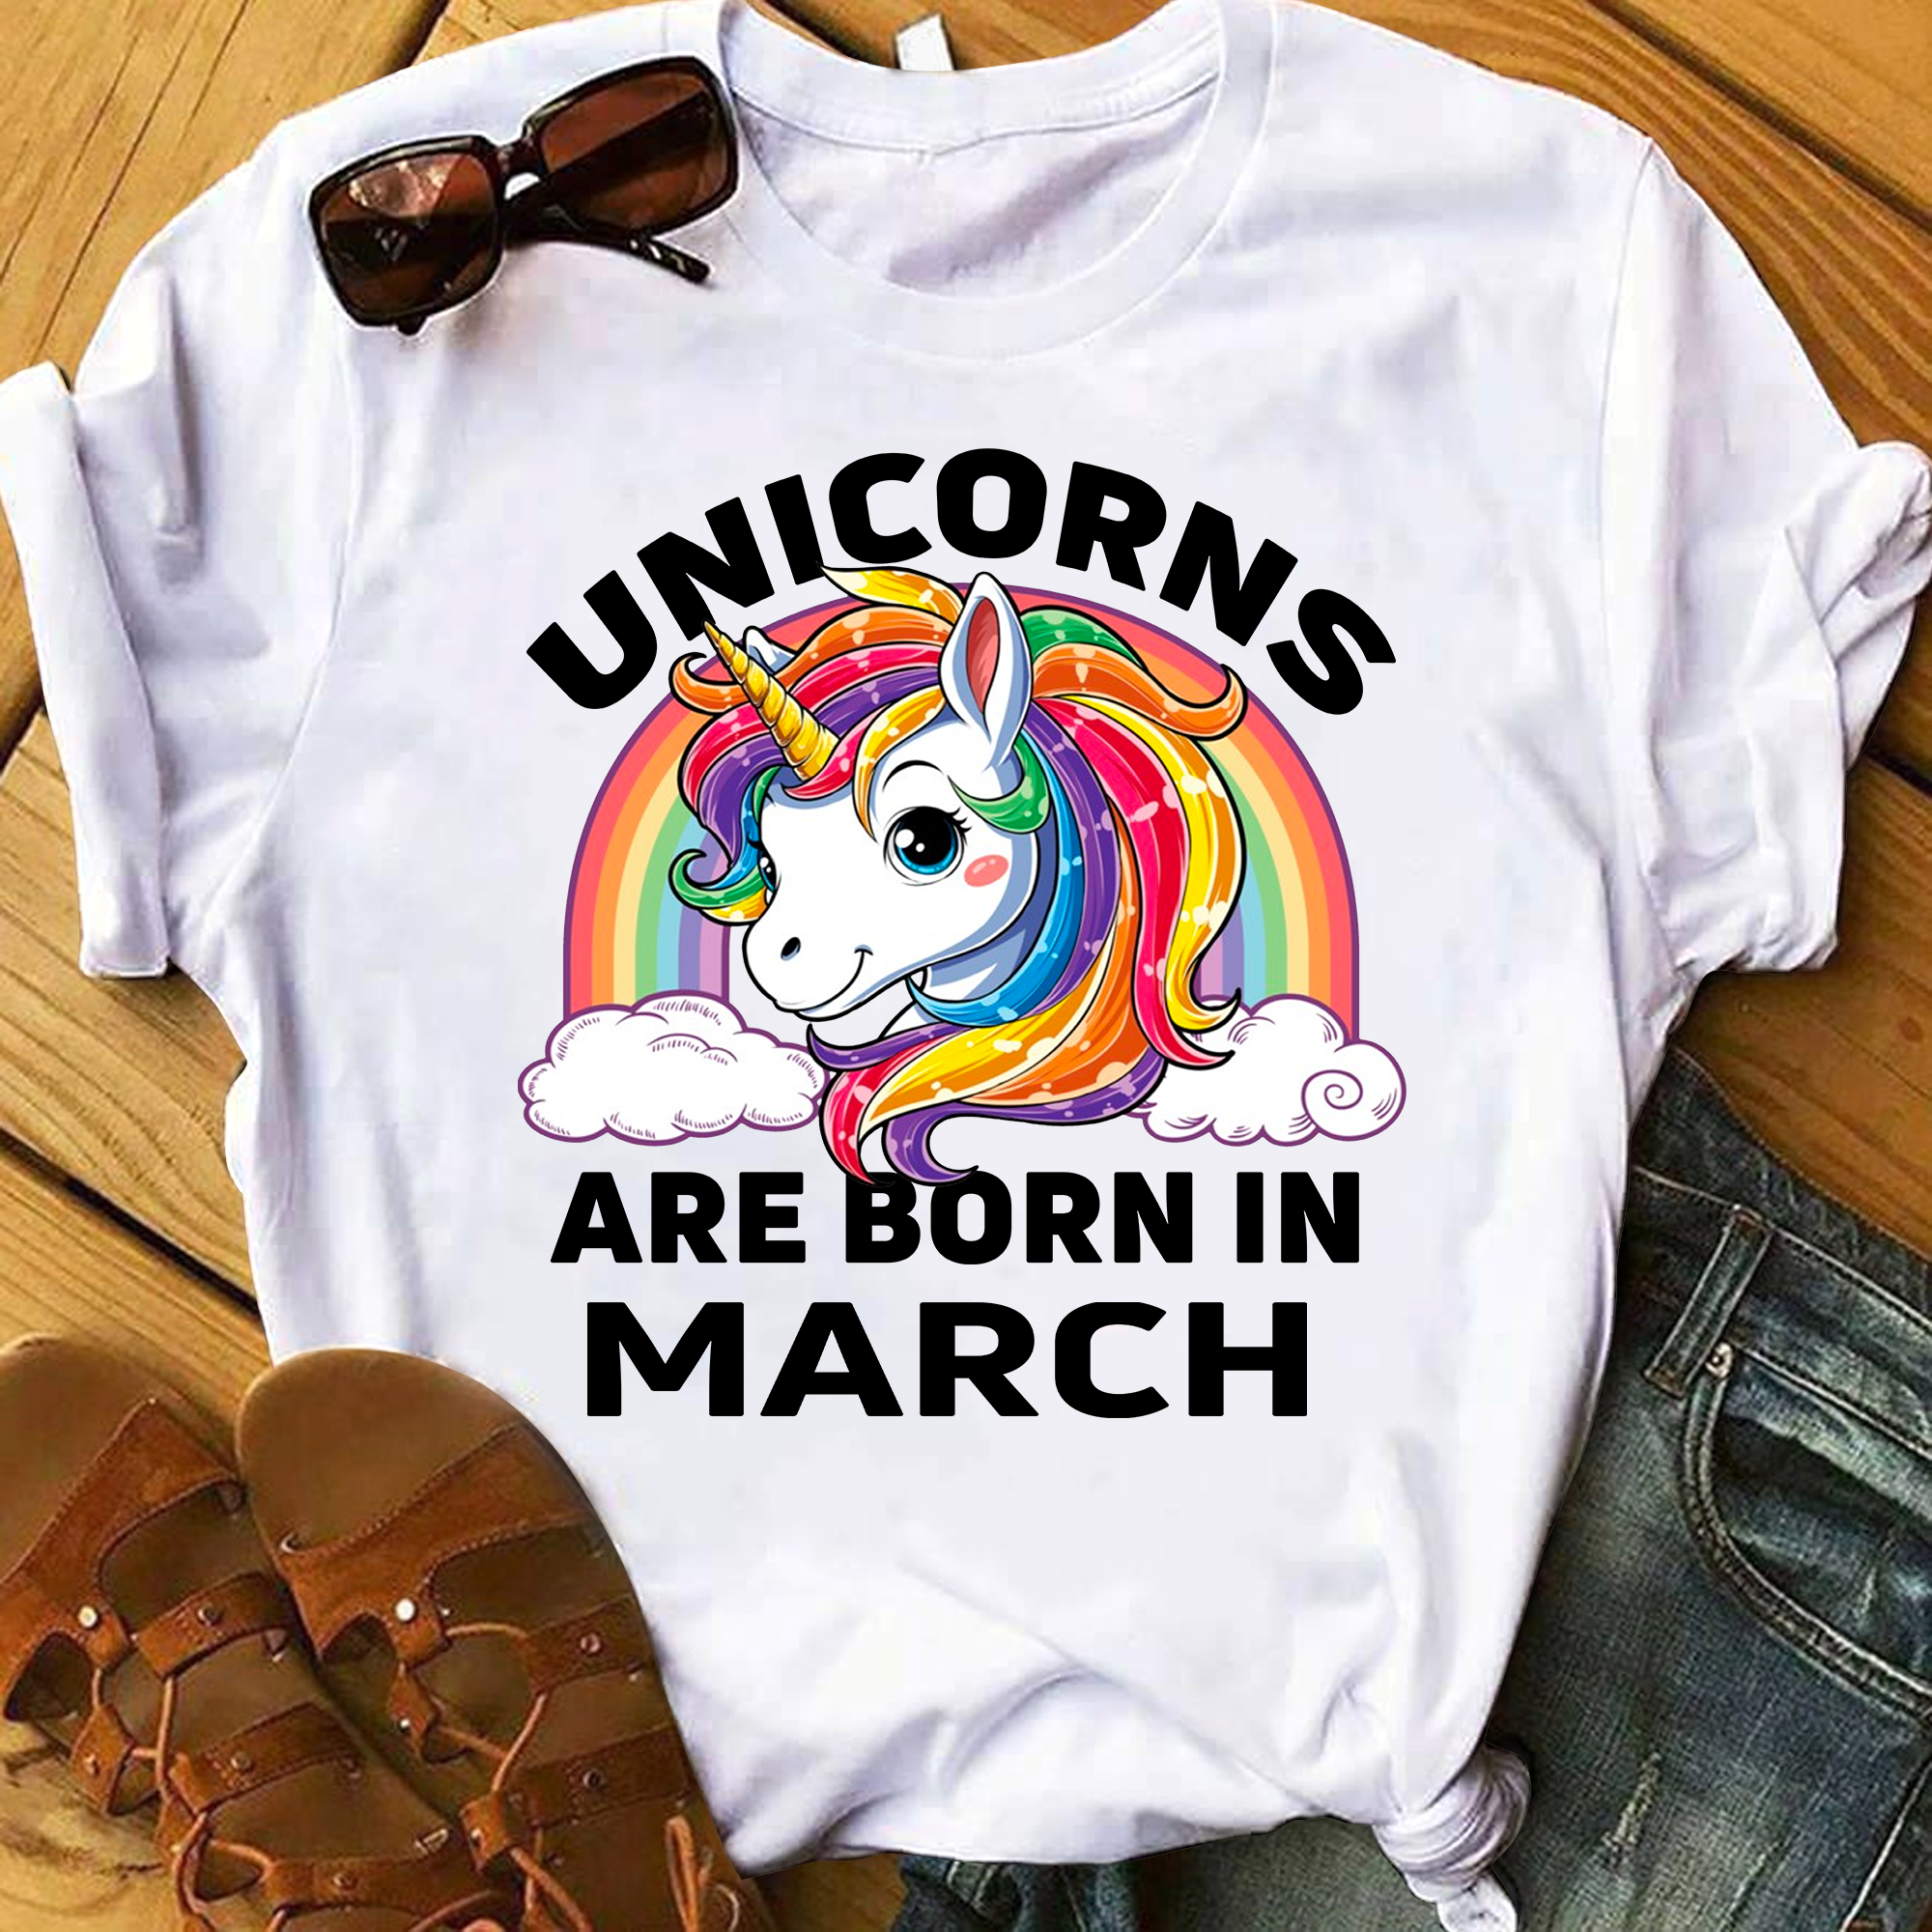 Unicorns Are Born In March Tshirt, Birthday Gift For Unicorn Lovers